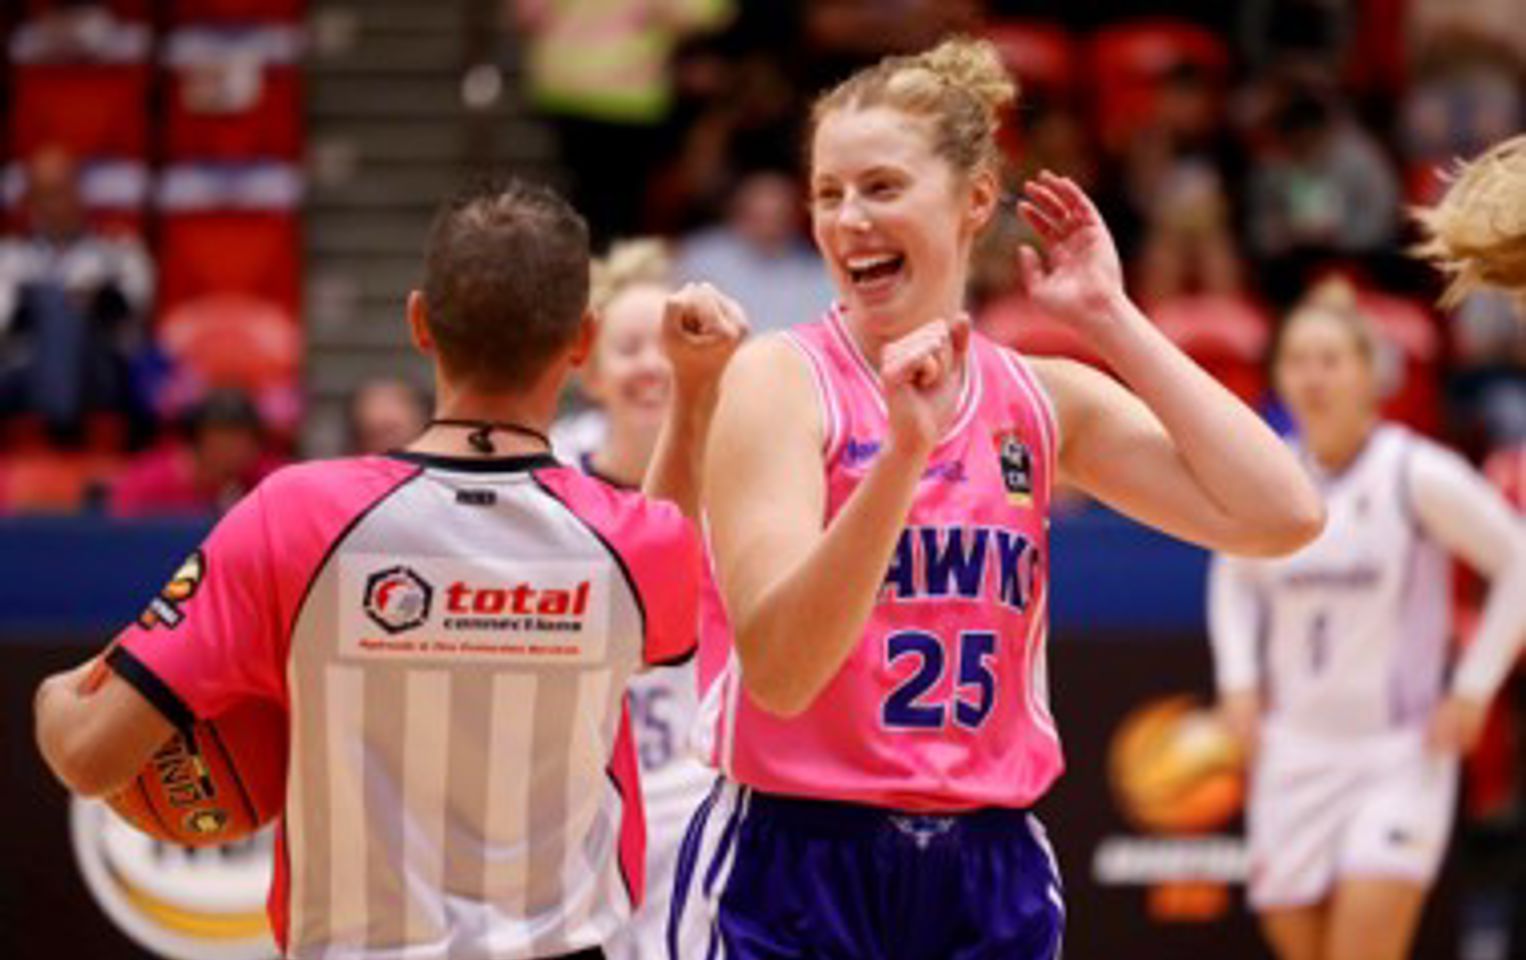 NBL 1 player in pink